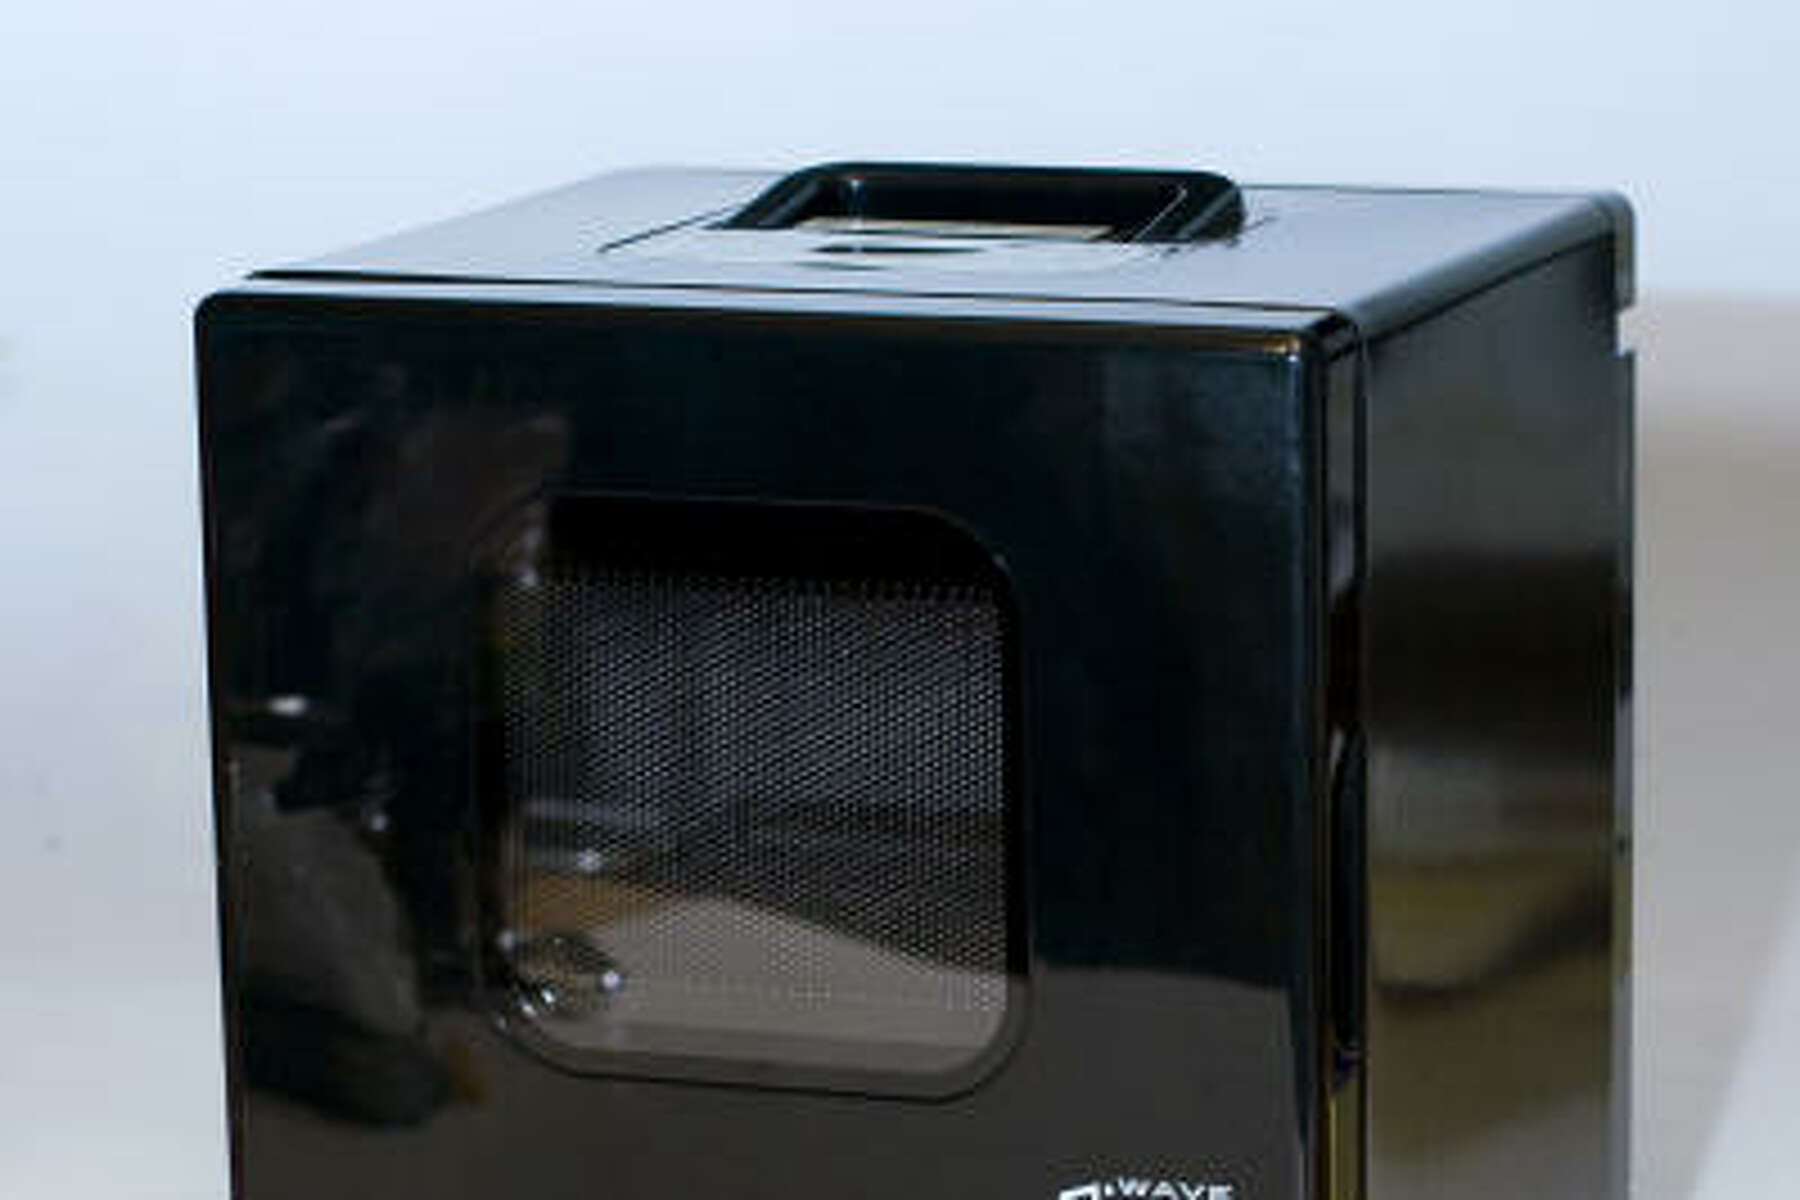 IWave Cube, the World's Smallest Compact Portable Microwave, as Featured on  The Today Show 